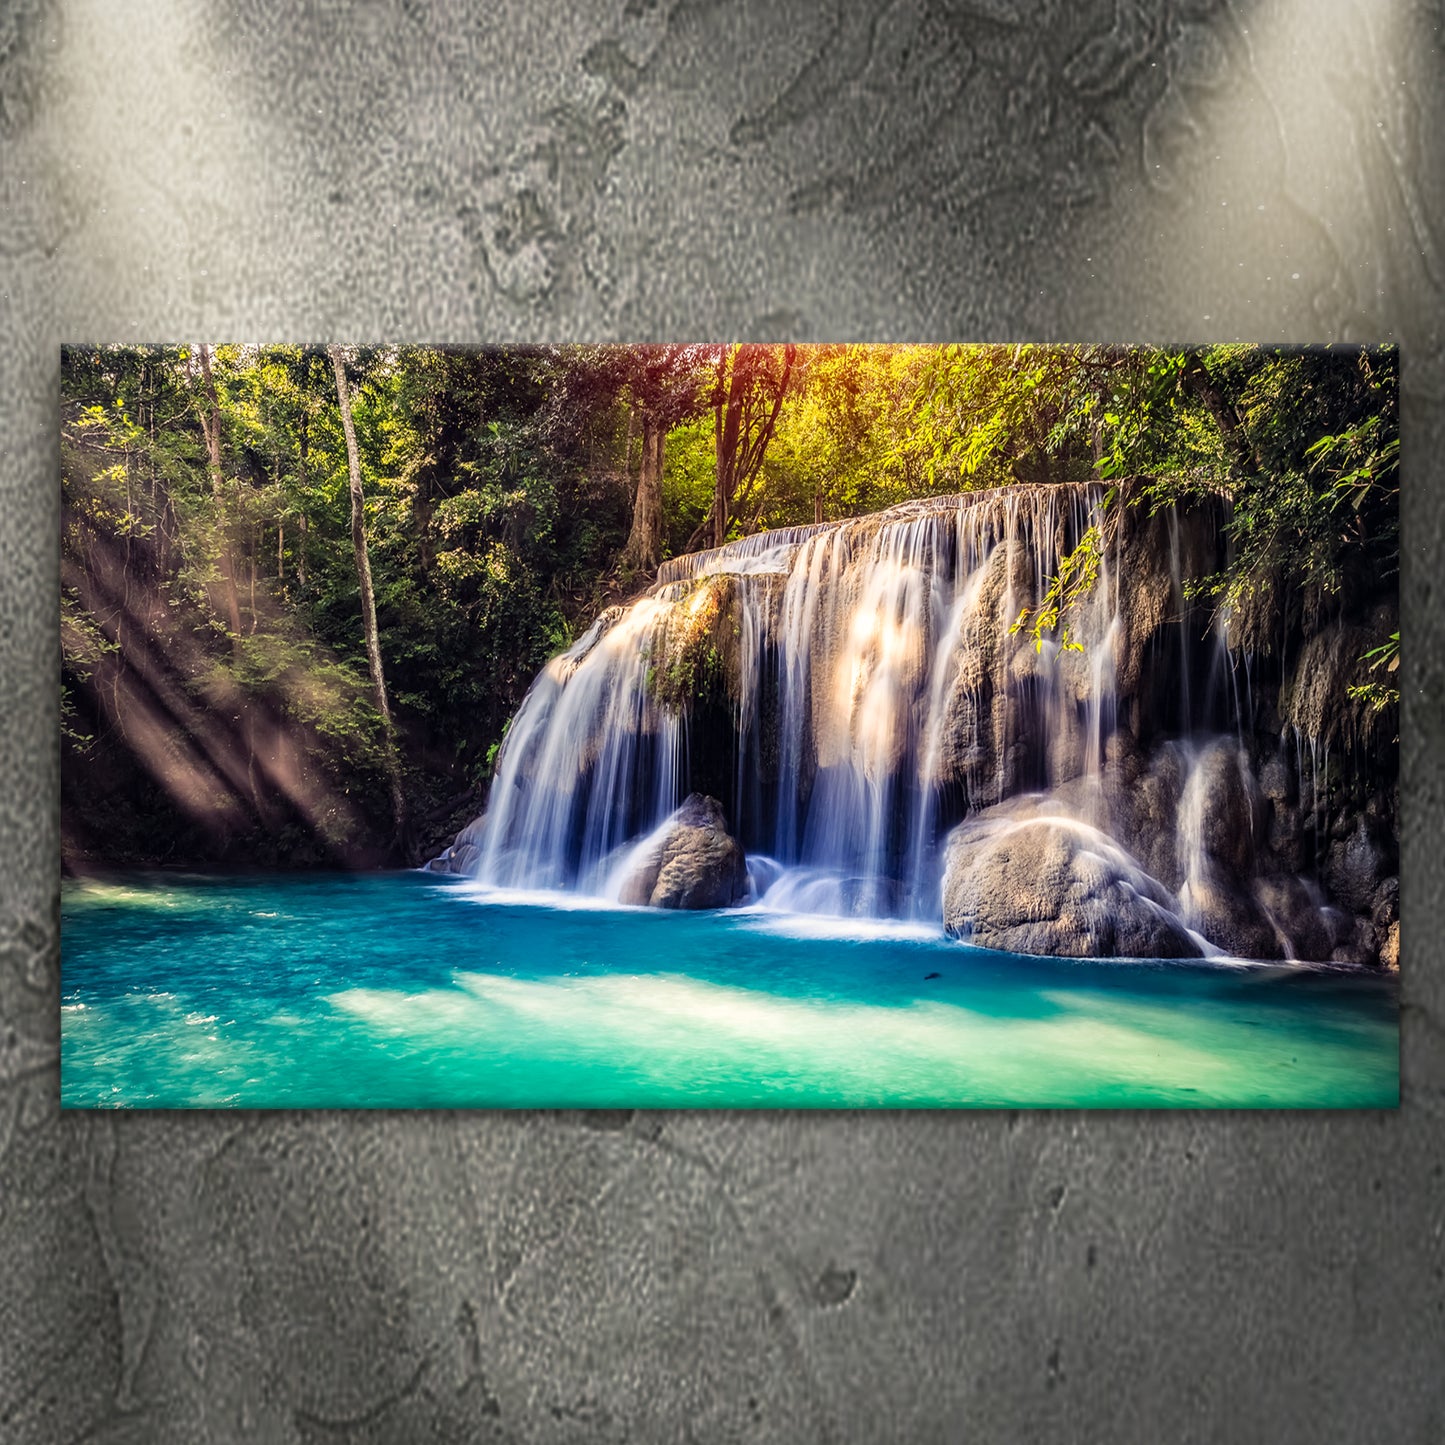 Rainforest Waterfall Canvas Wall Art - Image by Tailored Canvases